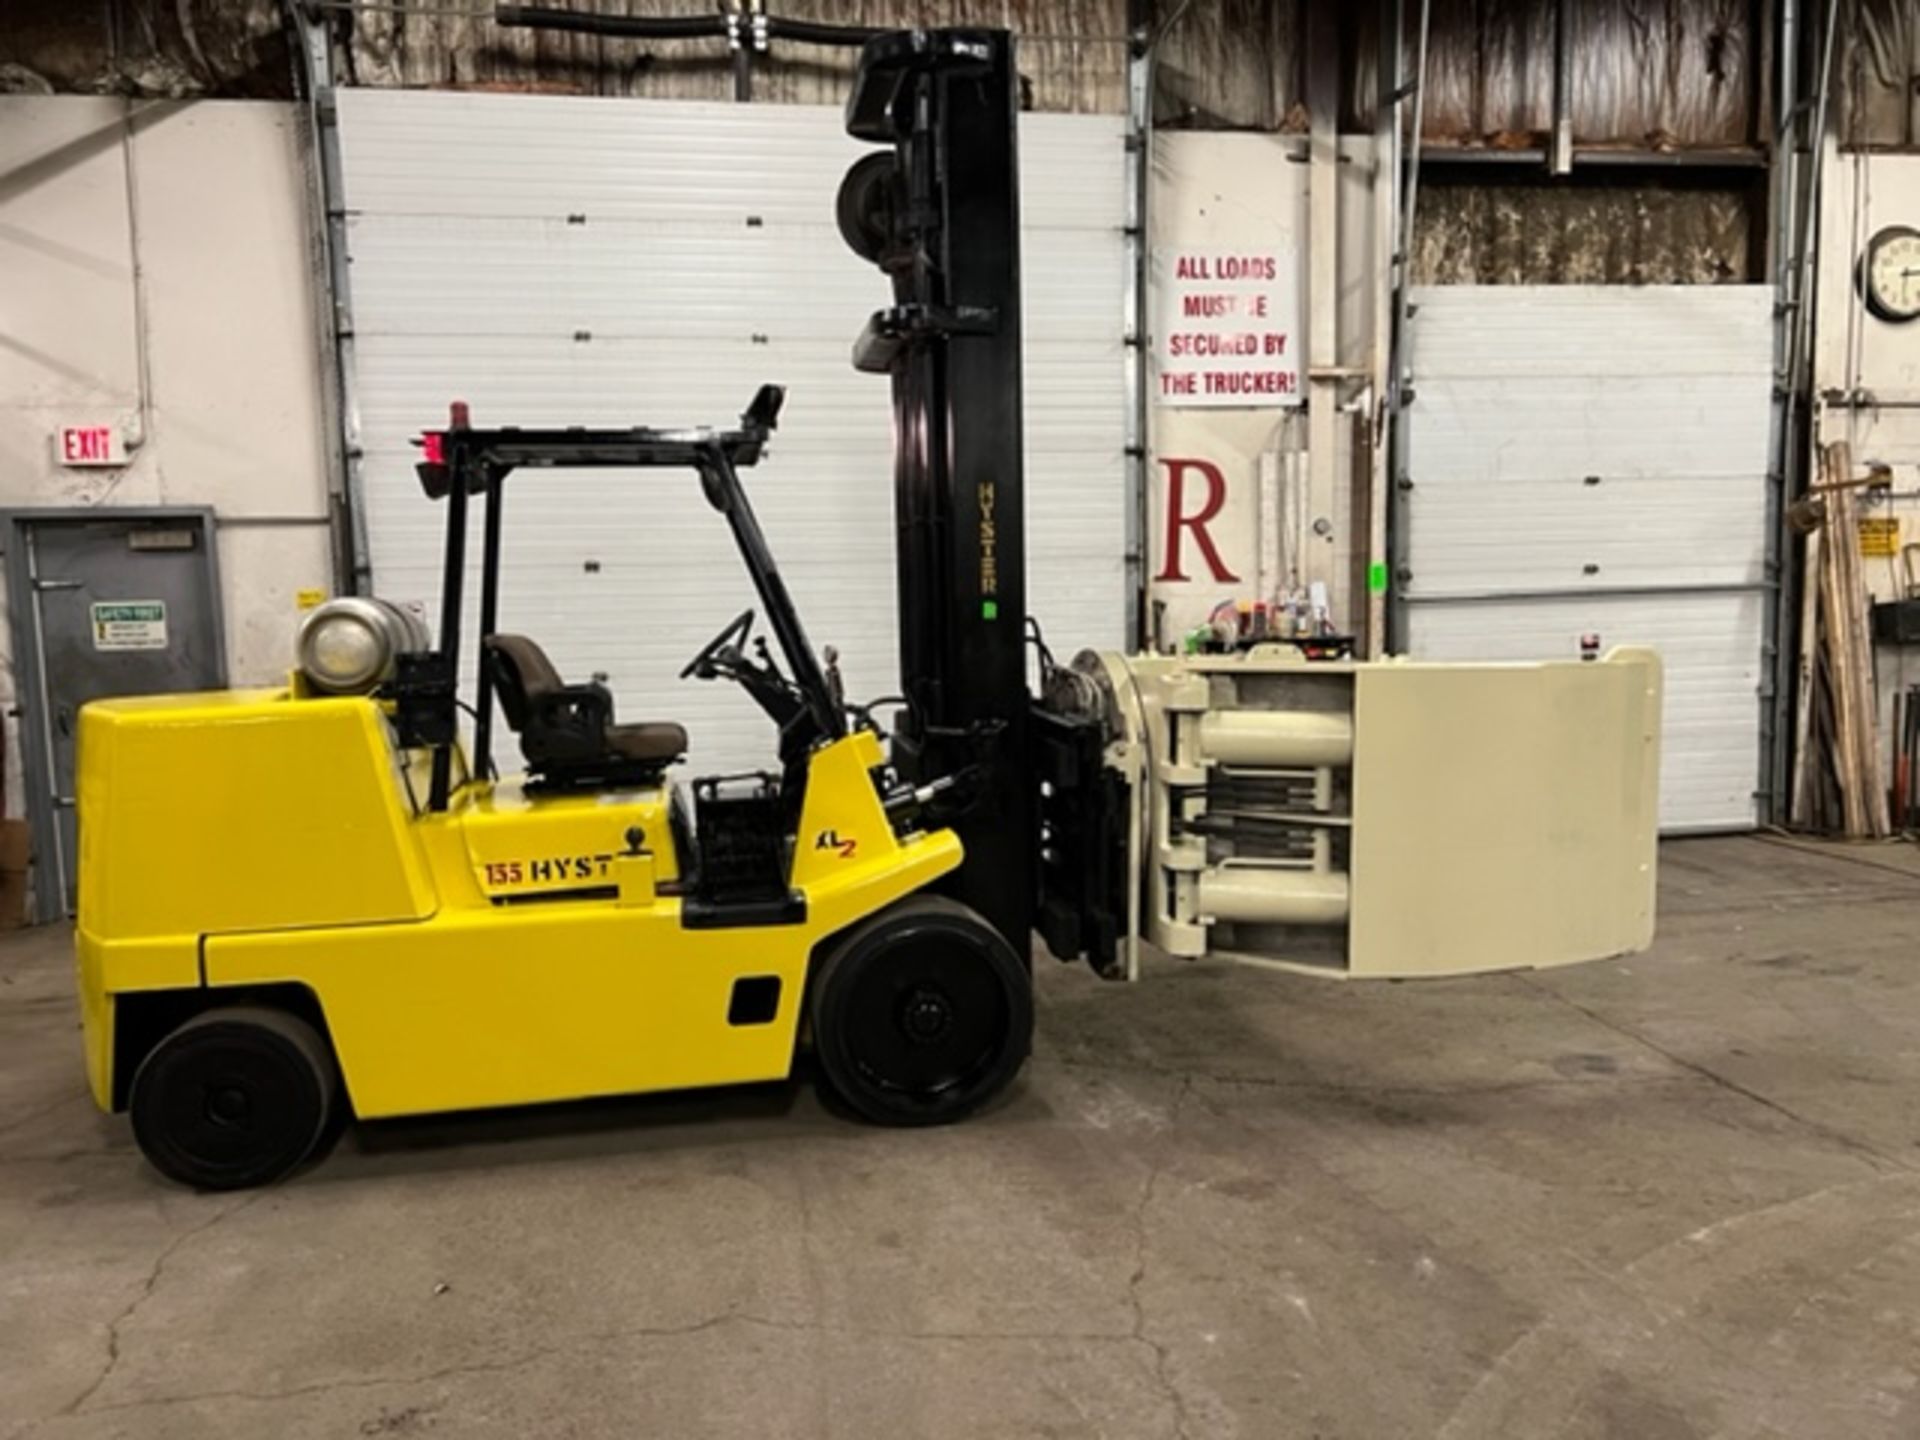 FREE CUSTOMS - Hyster model 155 15,500lbs Capacity OUTDOOR Forklift LPG (propane) Cascade Clamp